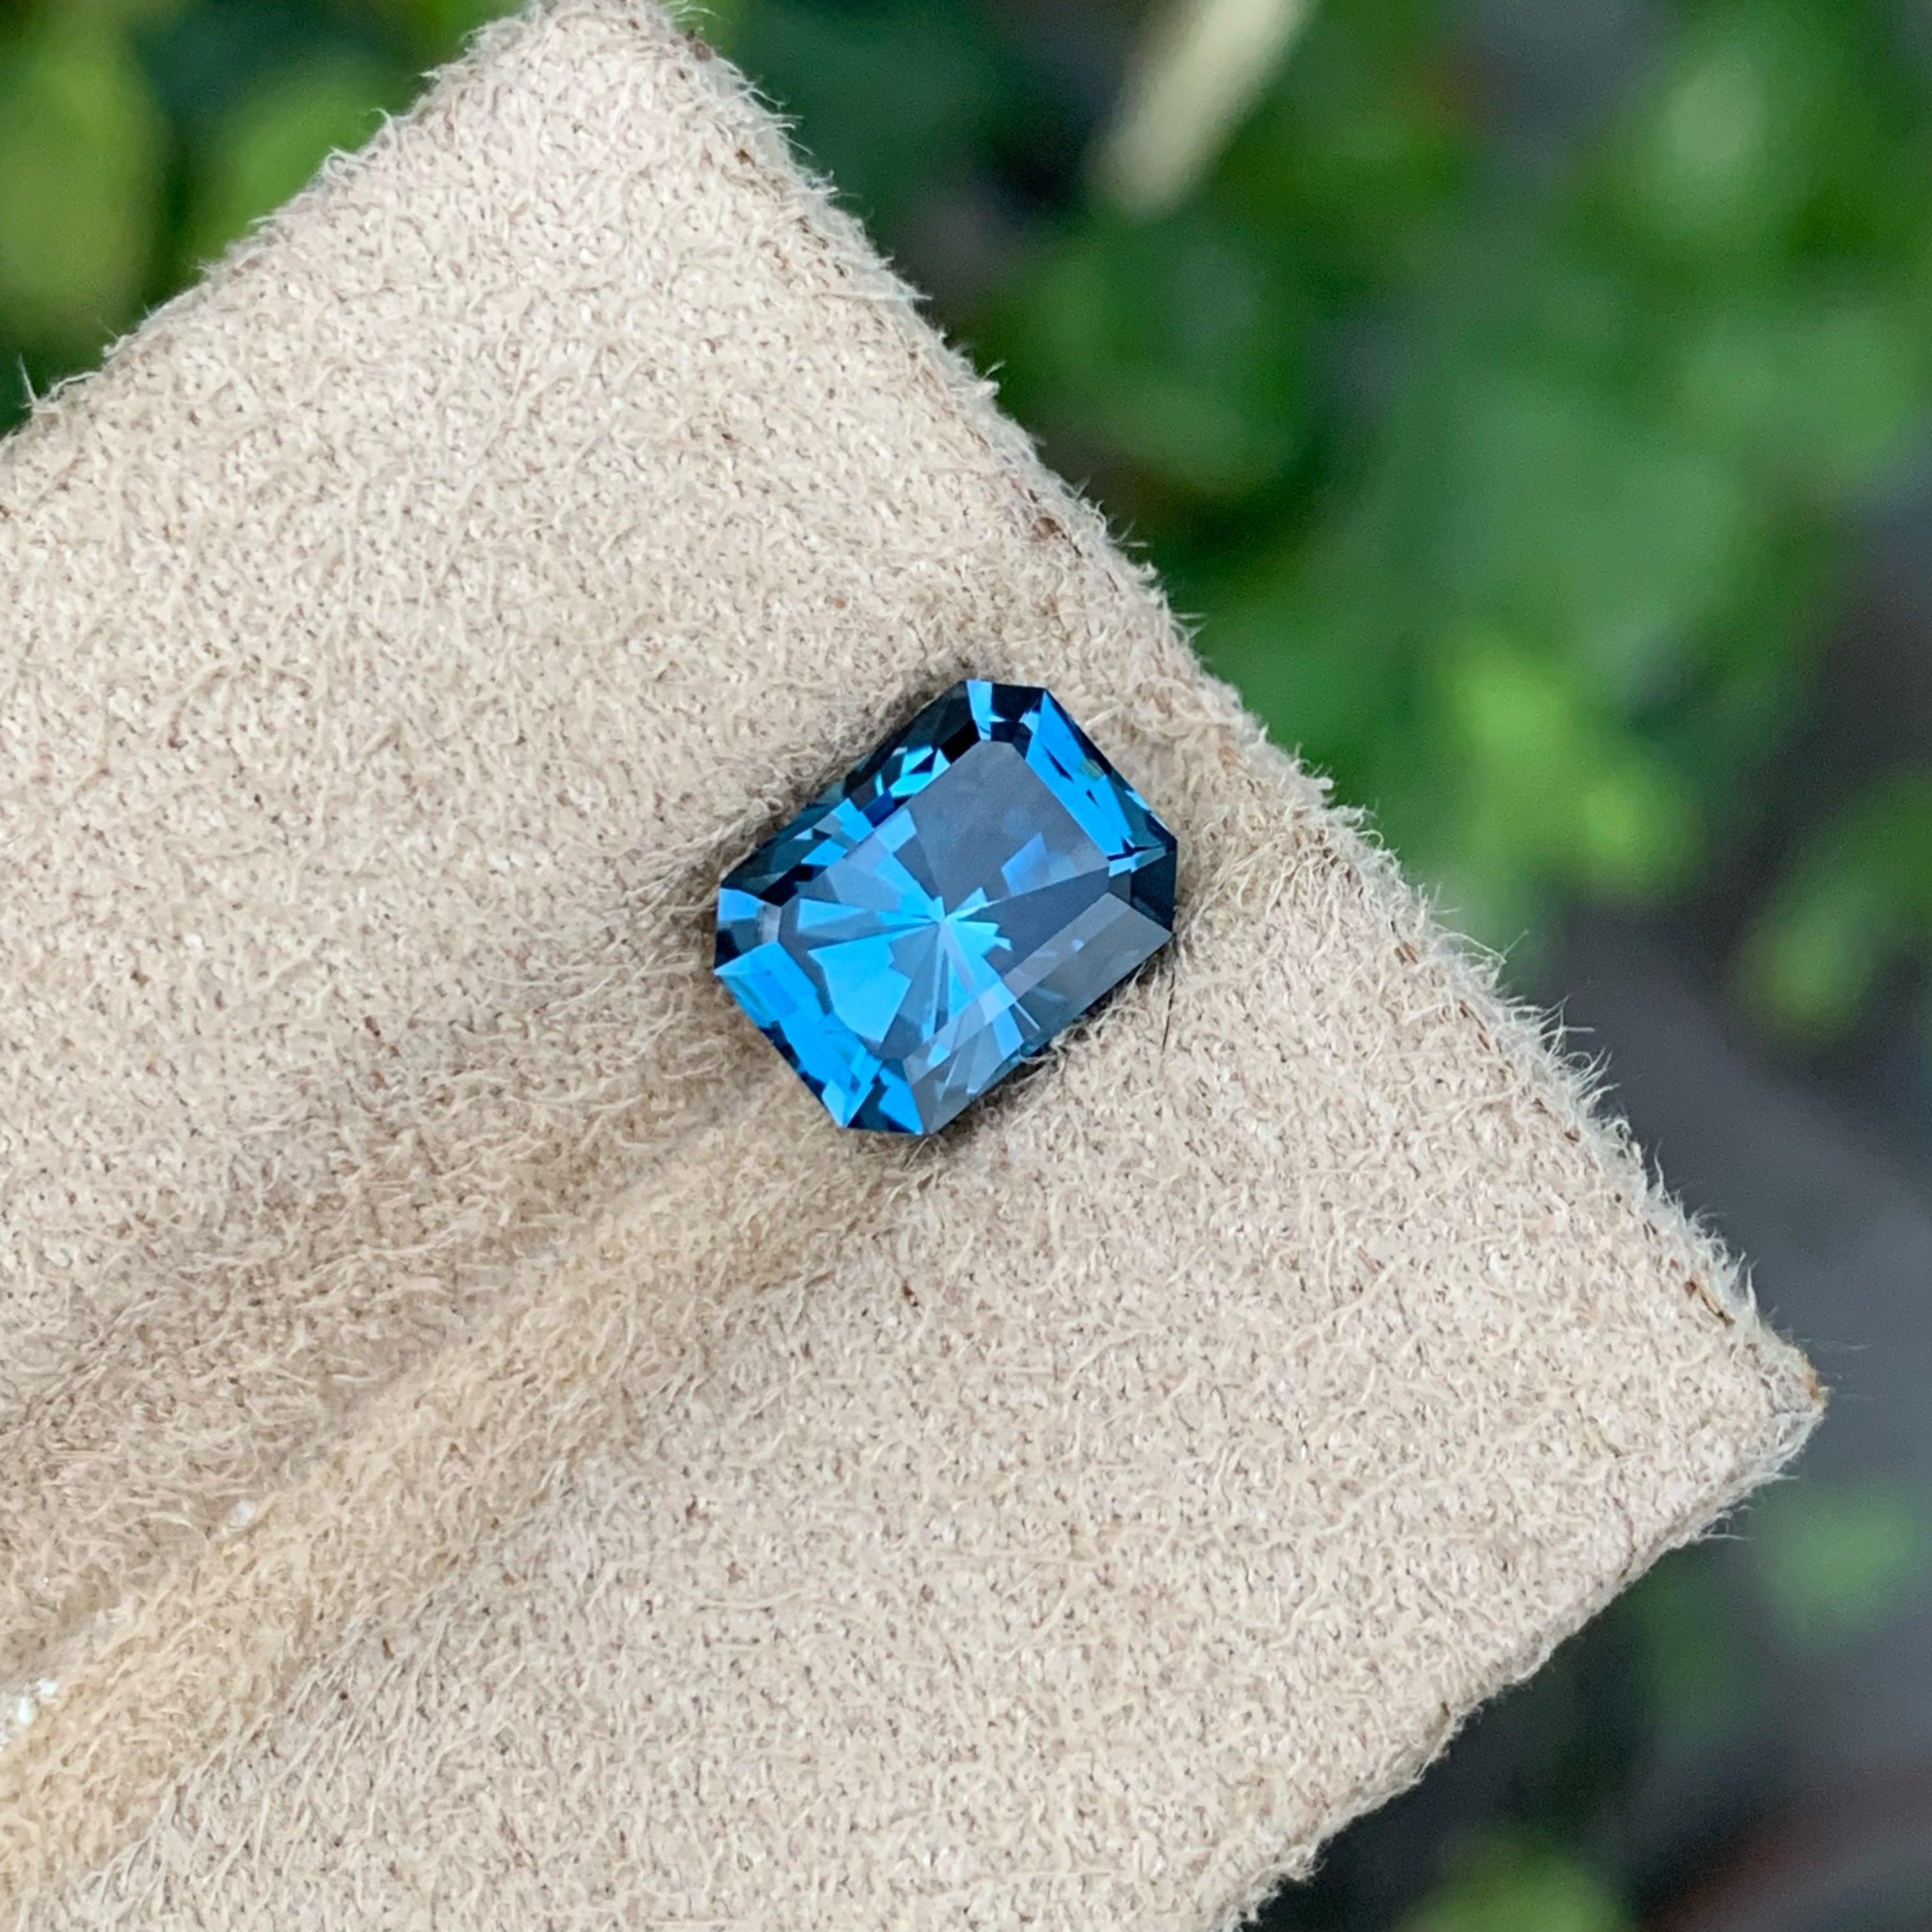 Beautiful Fancy Cut London Blue Topaz, available For Sale At Wholesale Price Natural High Quality 2.90 Carats Loupe Clean Clarity Loose Topaz Gemstone From Africa. 
Product Information:
GEMSTONE NAME: Beautiful Fancy Cut London Blue